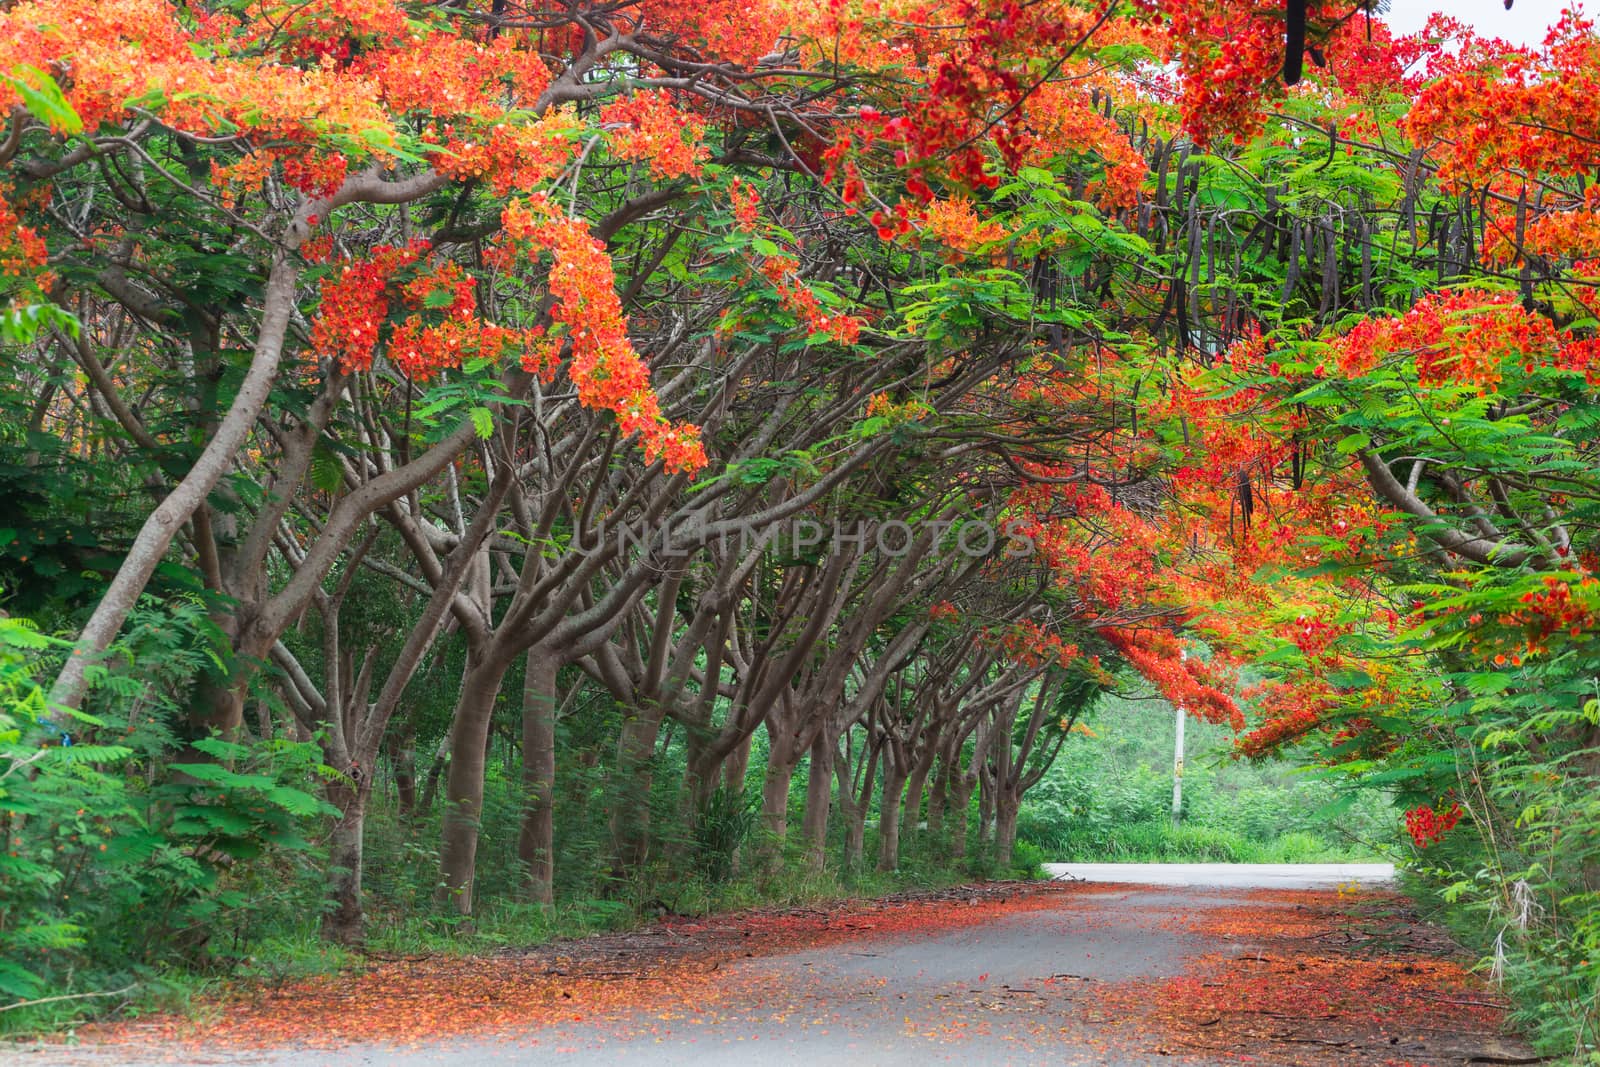 Scene of Flame Tree, Royal Poinciana by thampapon